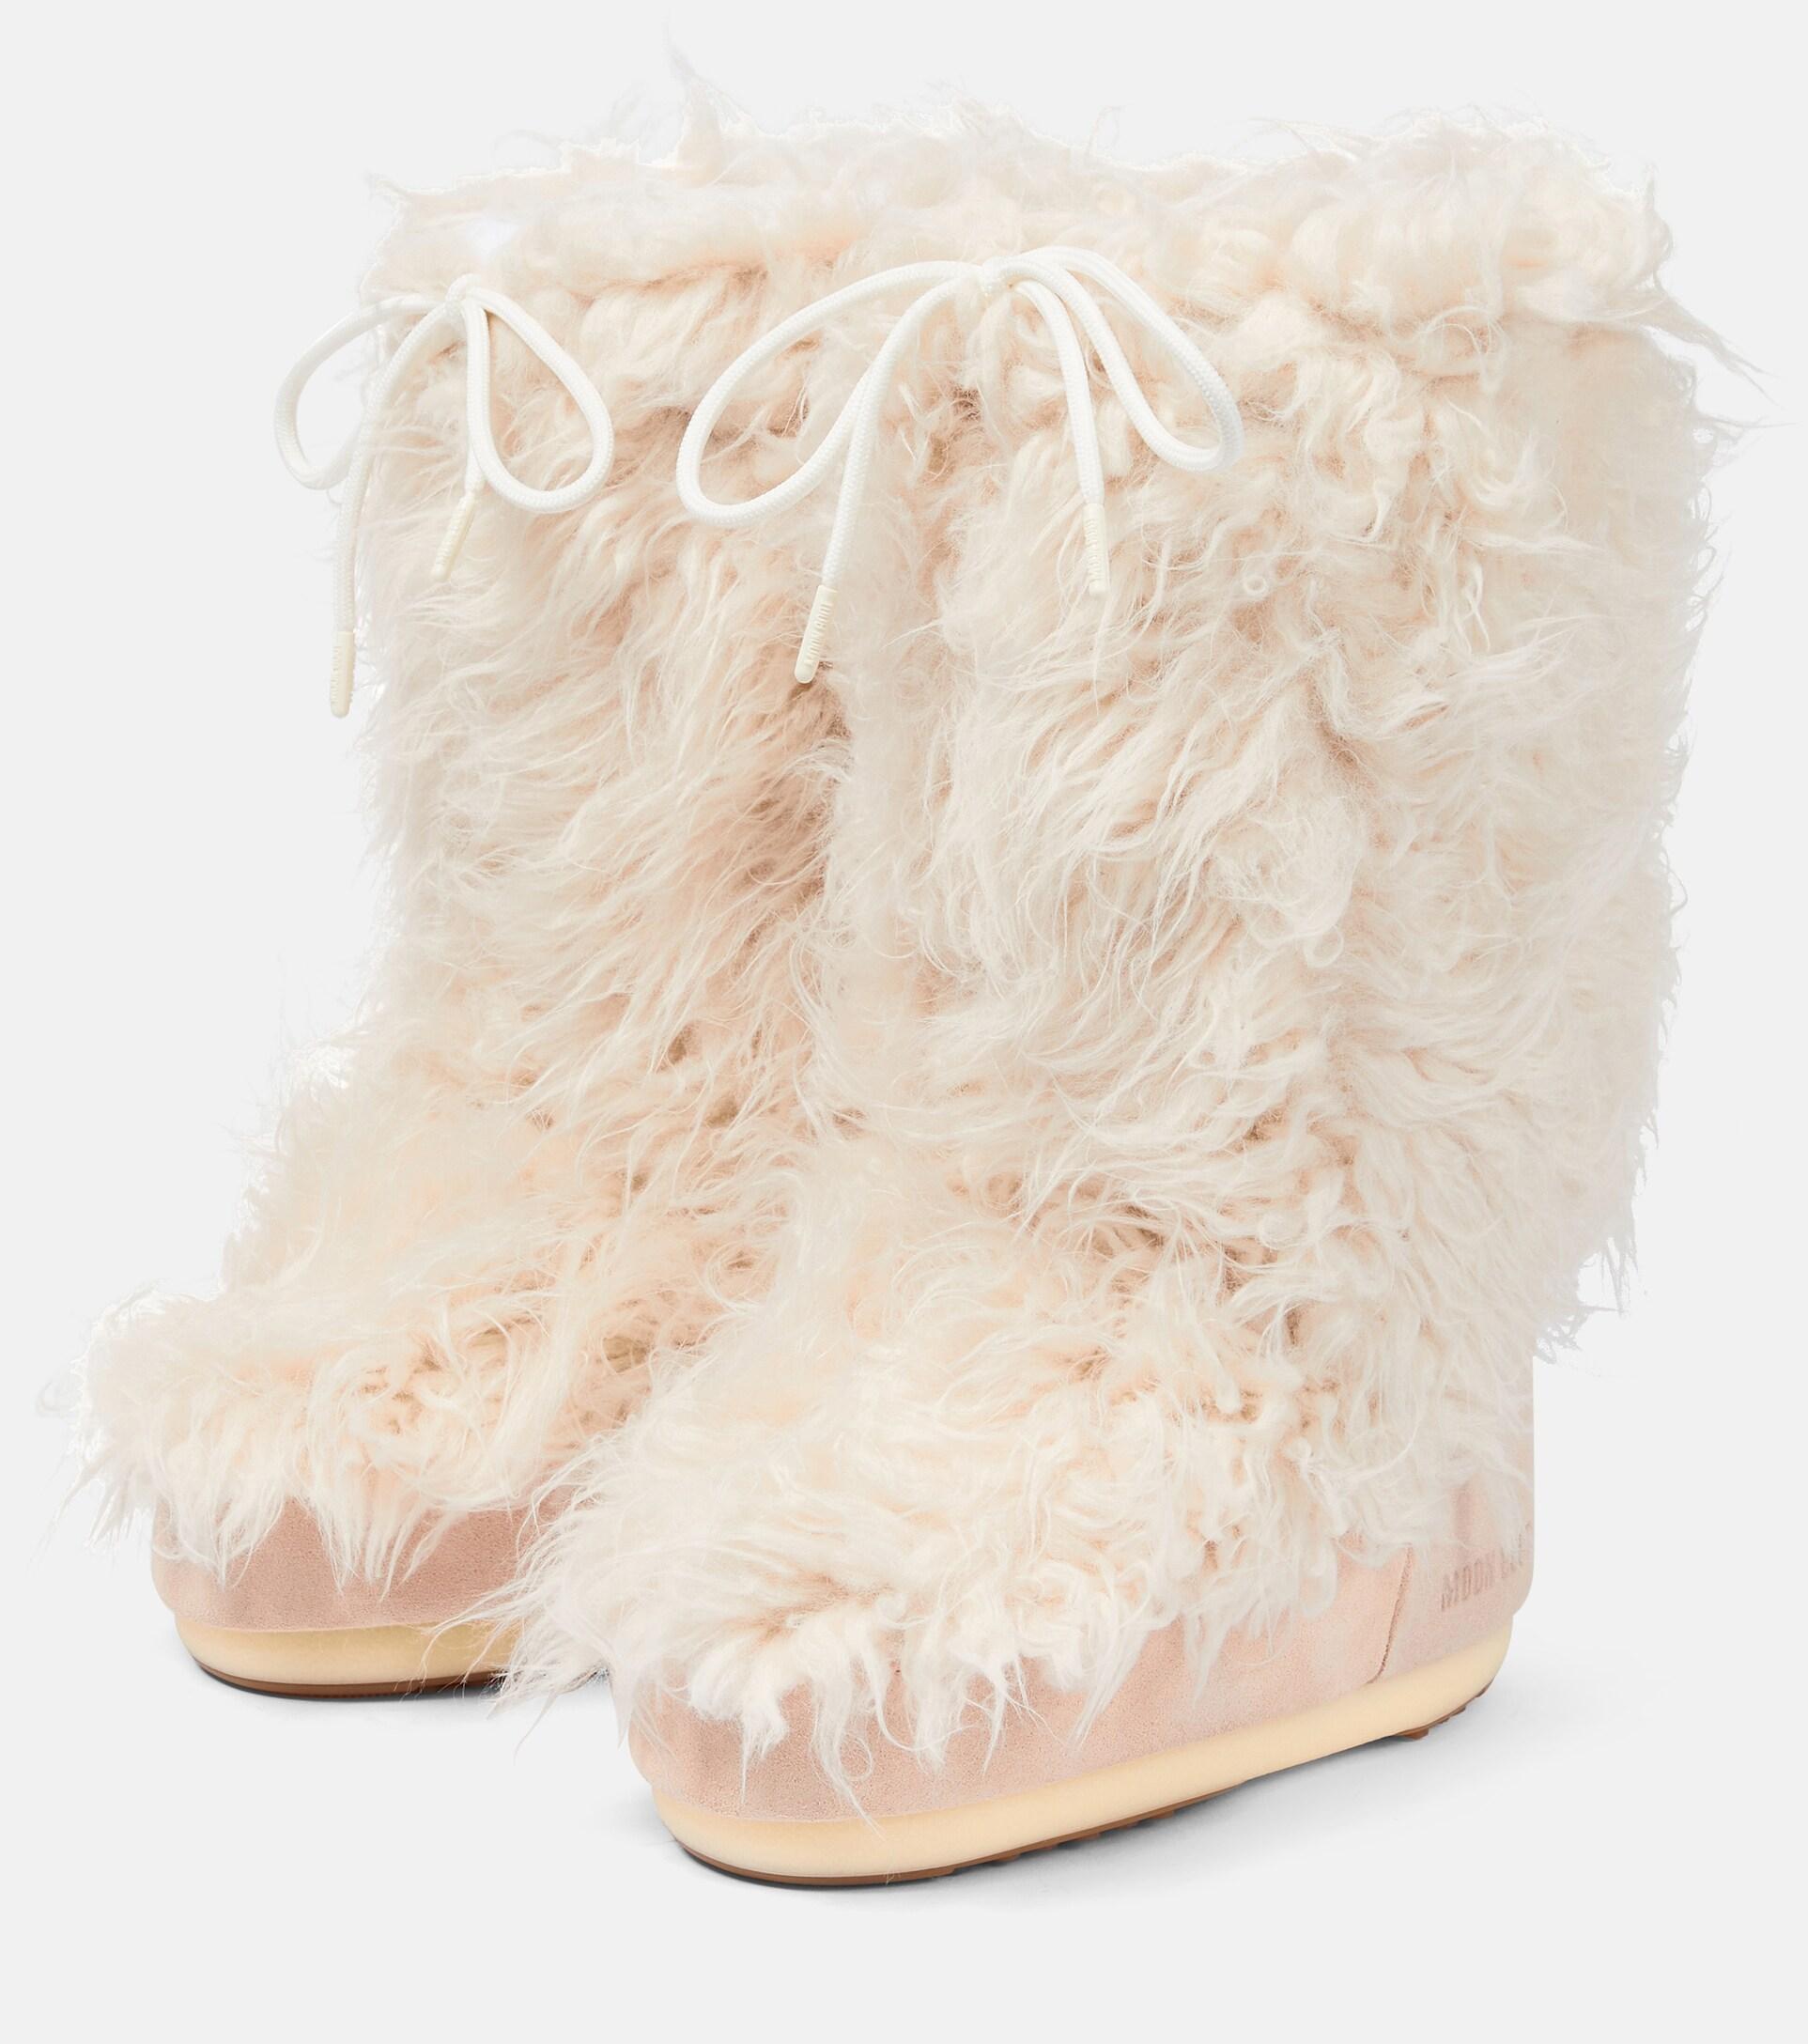 Moon Boot Icon Yeti Knee-high Boots in White